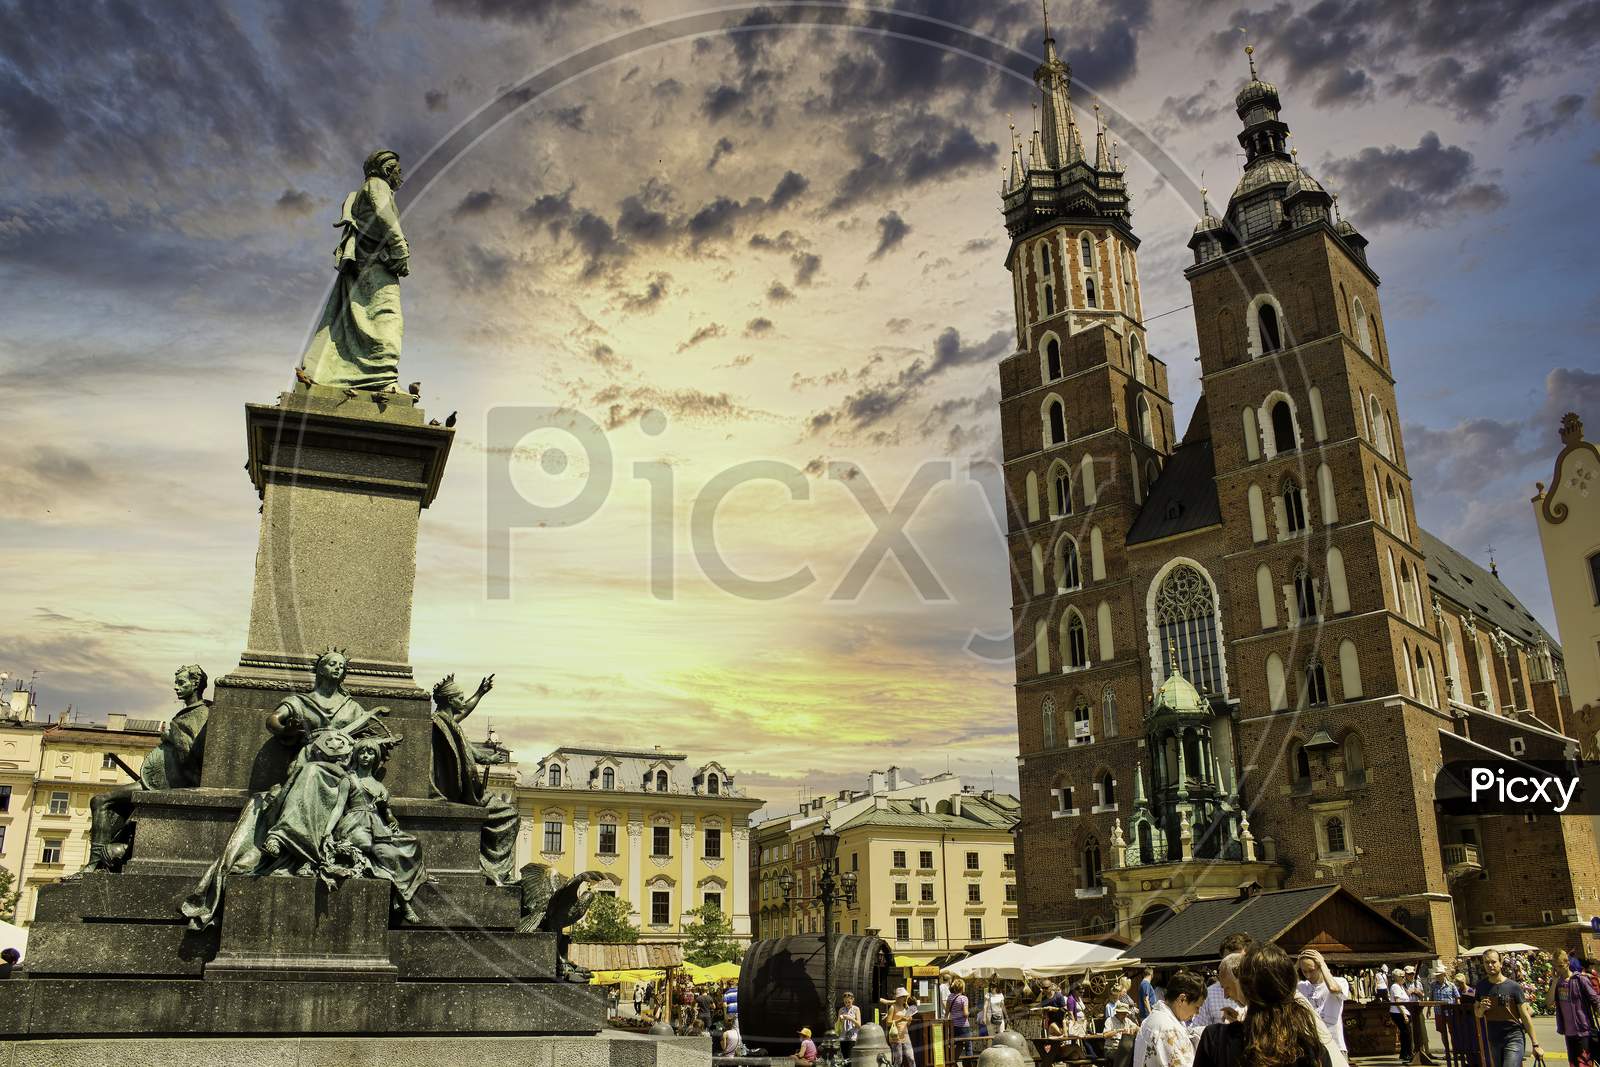 European Monuments Opposite St. Mary'S Basilica Gothic Church Against Dramatic Sunset Located In Krakow City, Poland, Europe